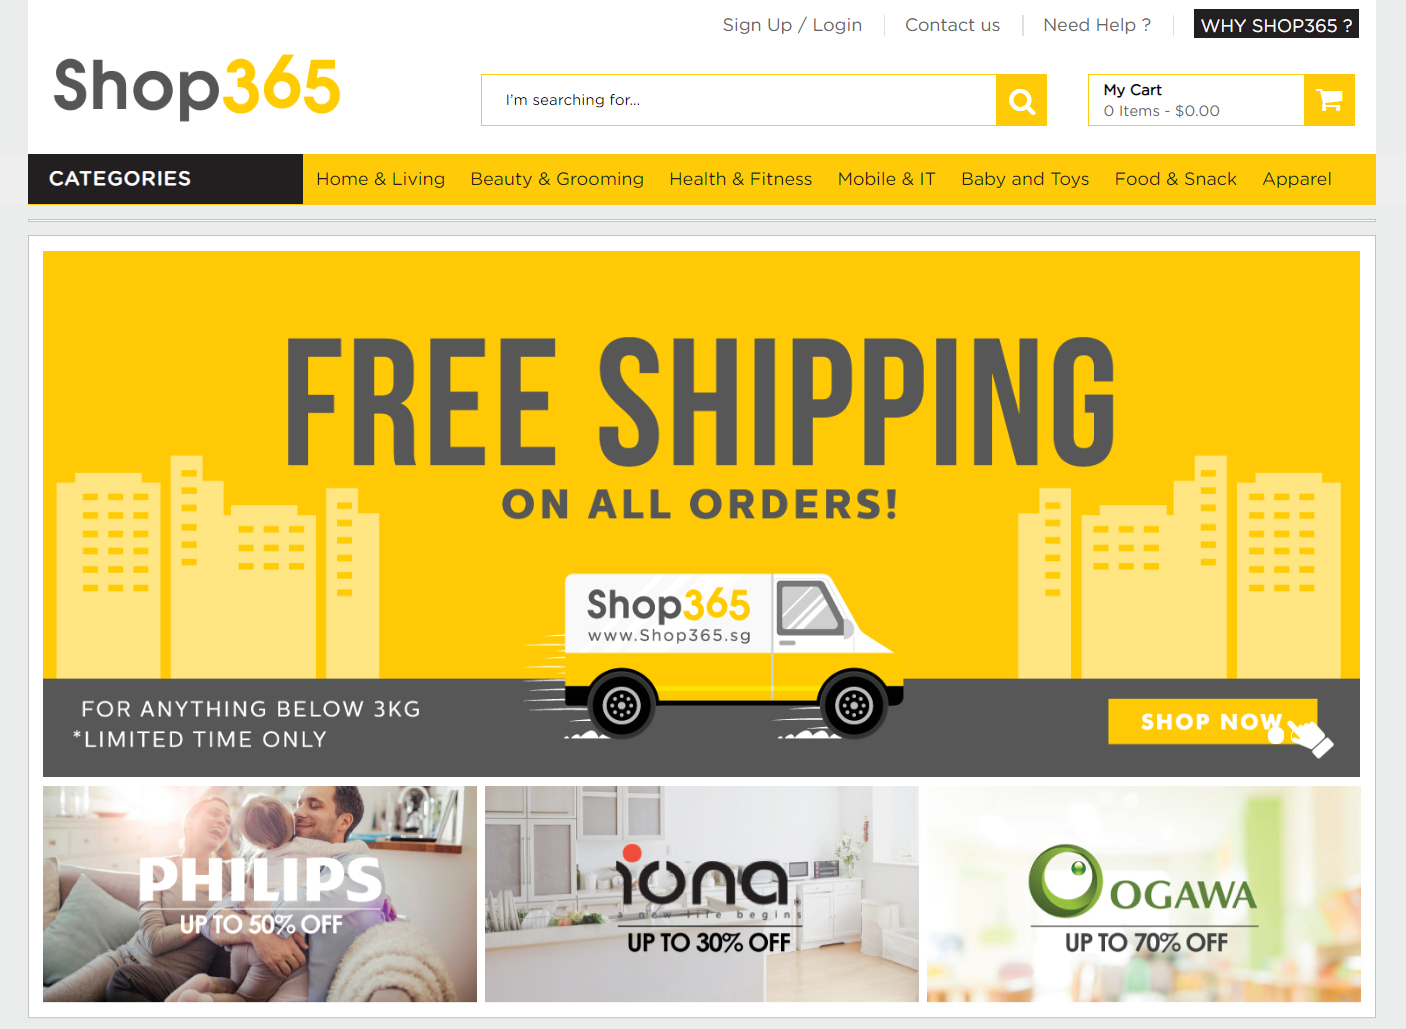 Top 10 Shopping Sites in Singapore - Shop365